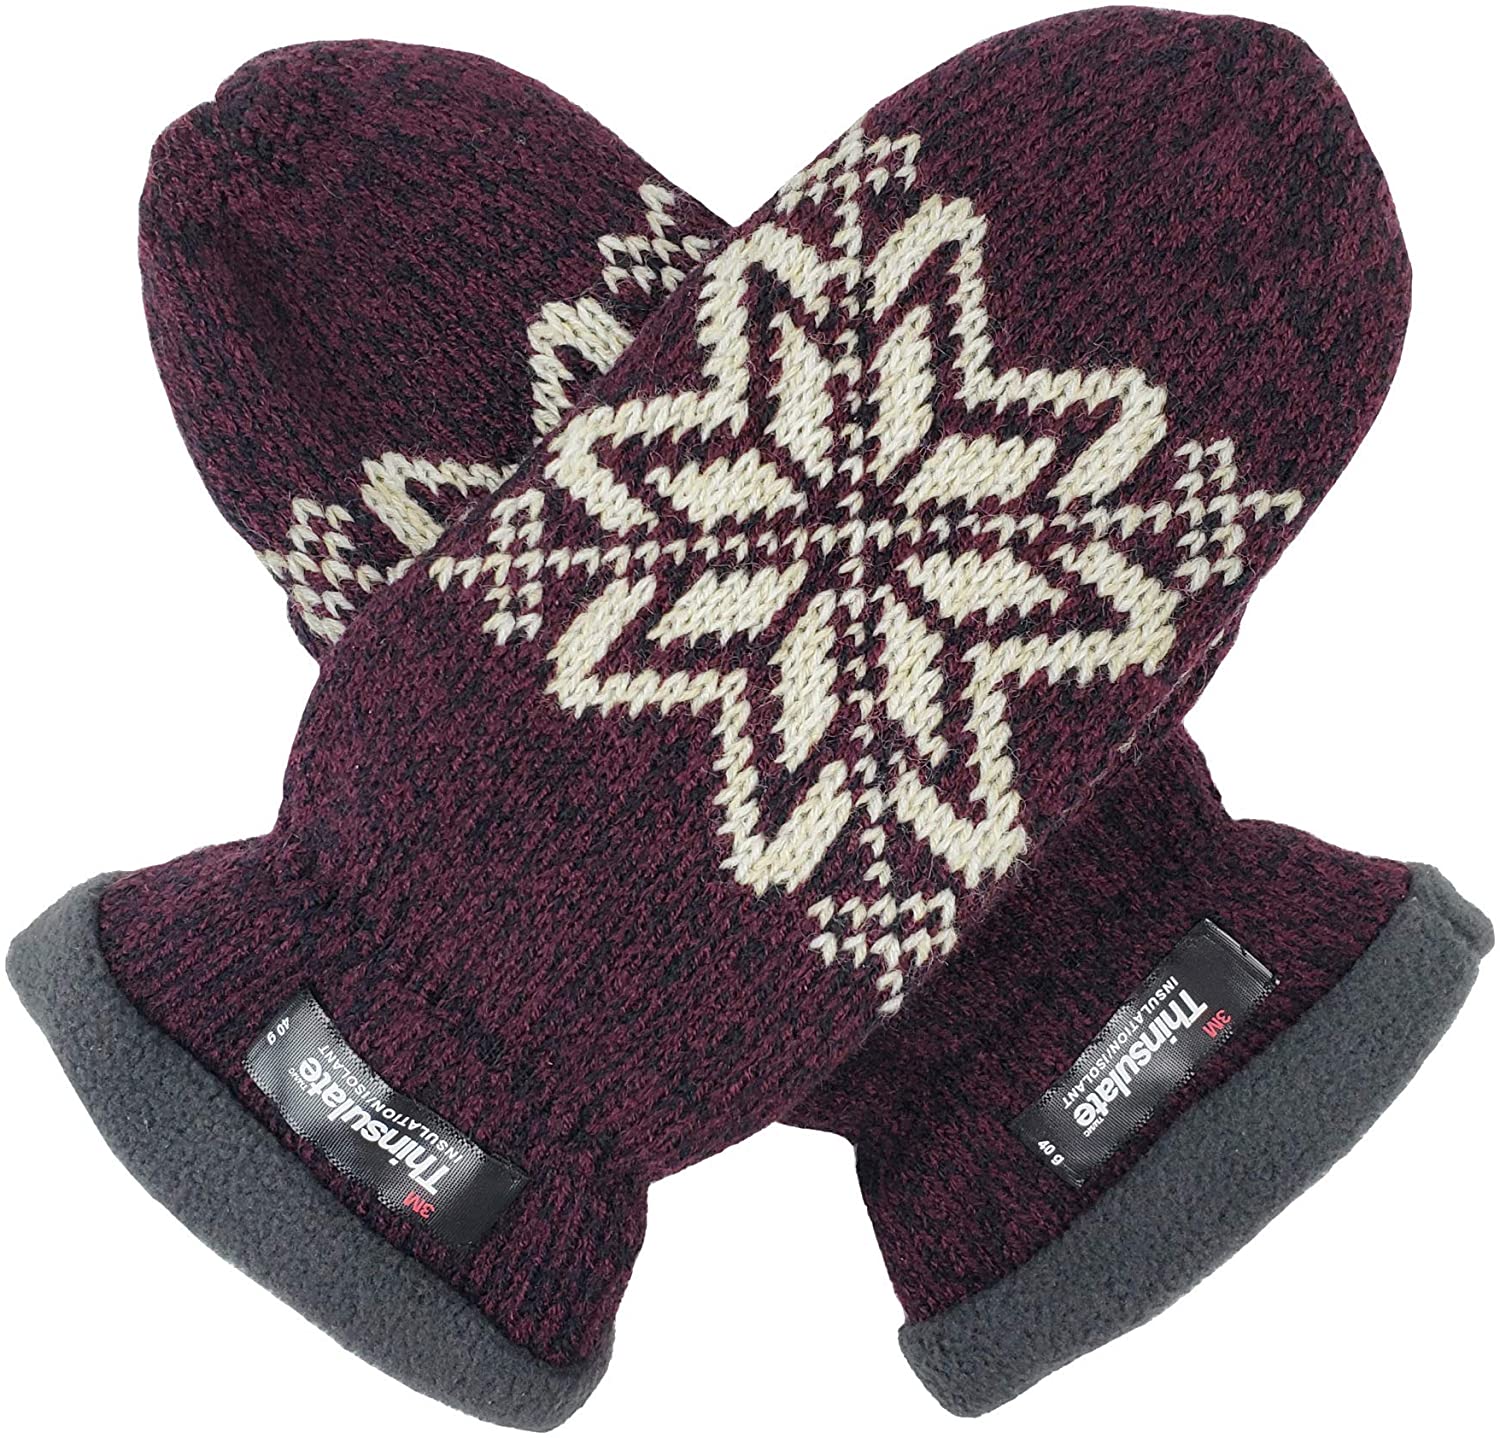 Bruceriver Women Snowflake Knit Mittens with Warm Thinsulate Fleece Lining Size M Beige